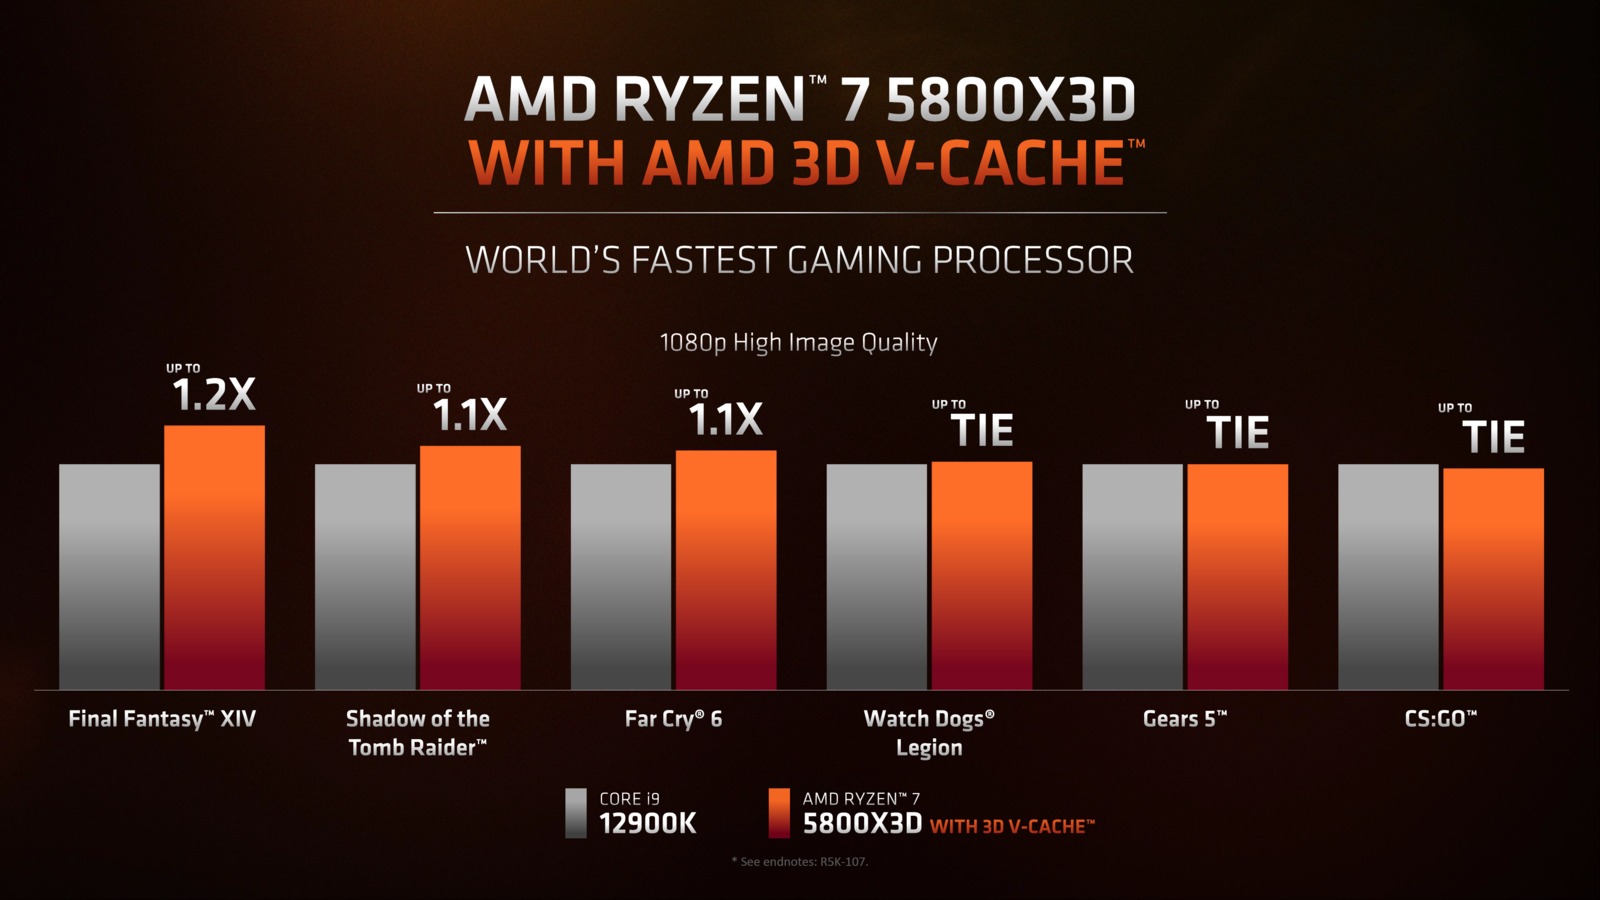 AMD Ryzen 7 5800X3D shines in the first gaming benchmark